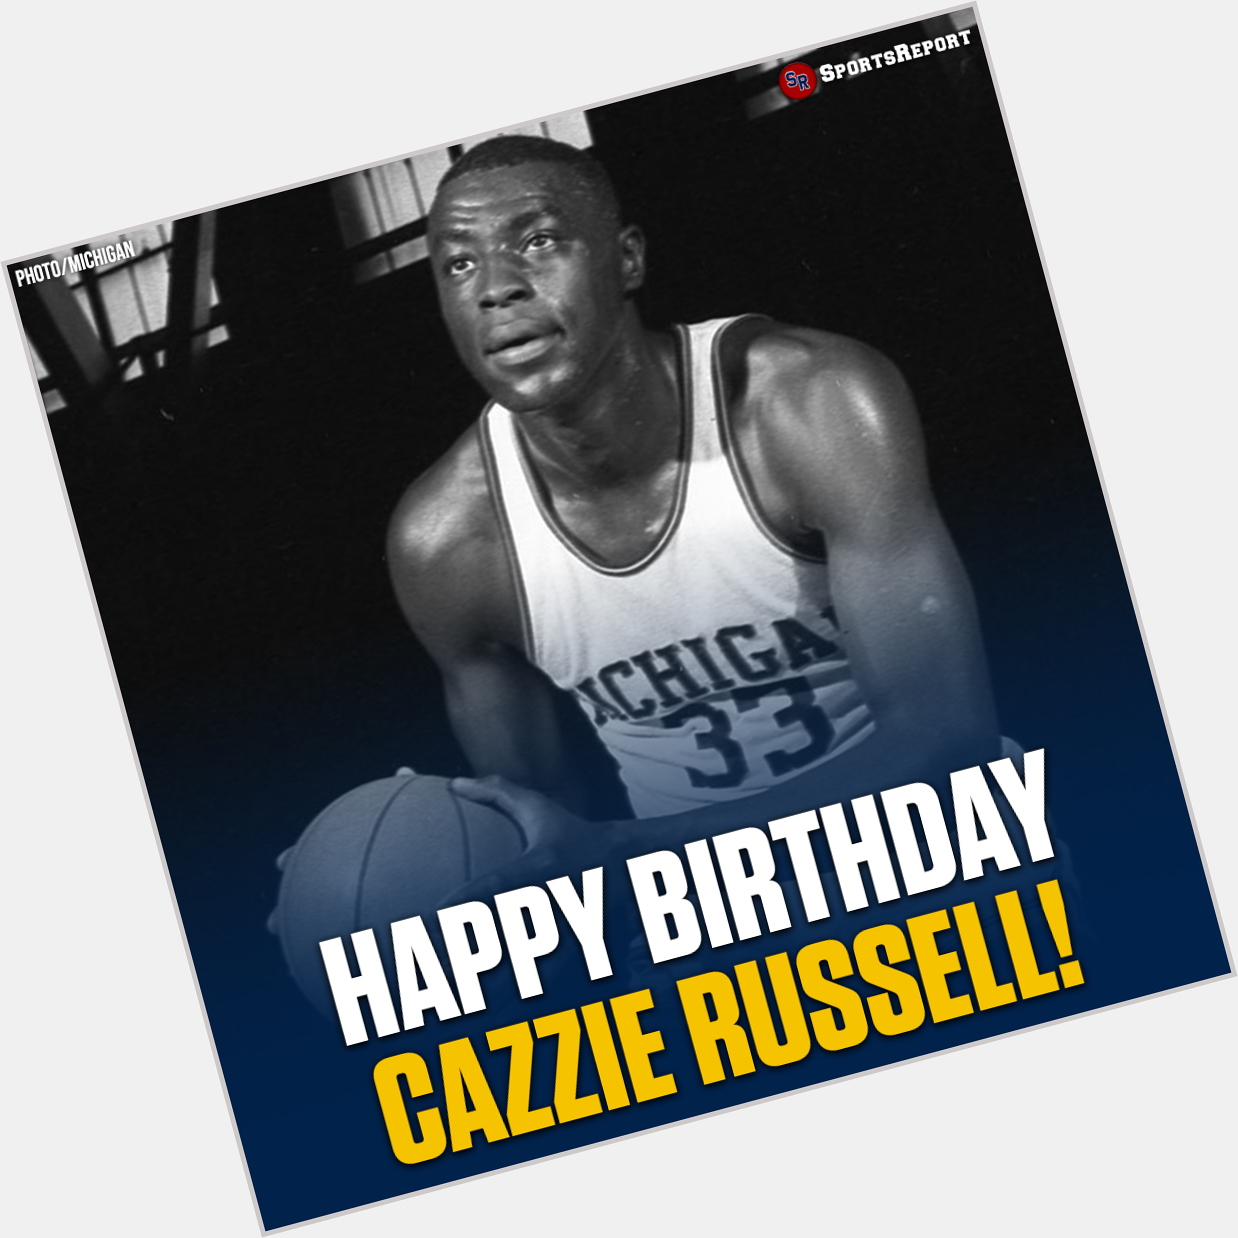  Fans, let\s wish Legend Cazzie Russell a Happy Birthday! 